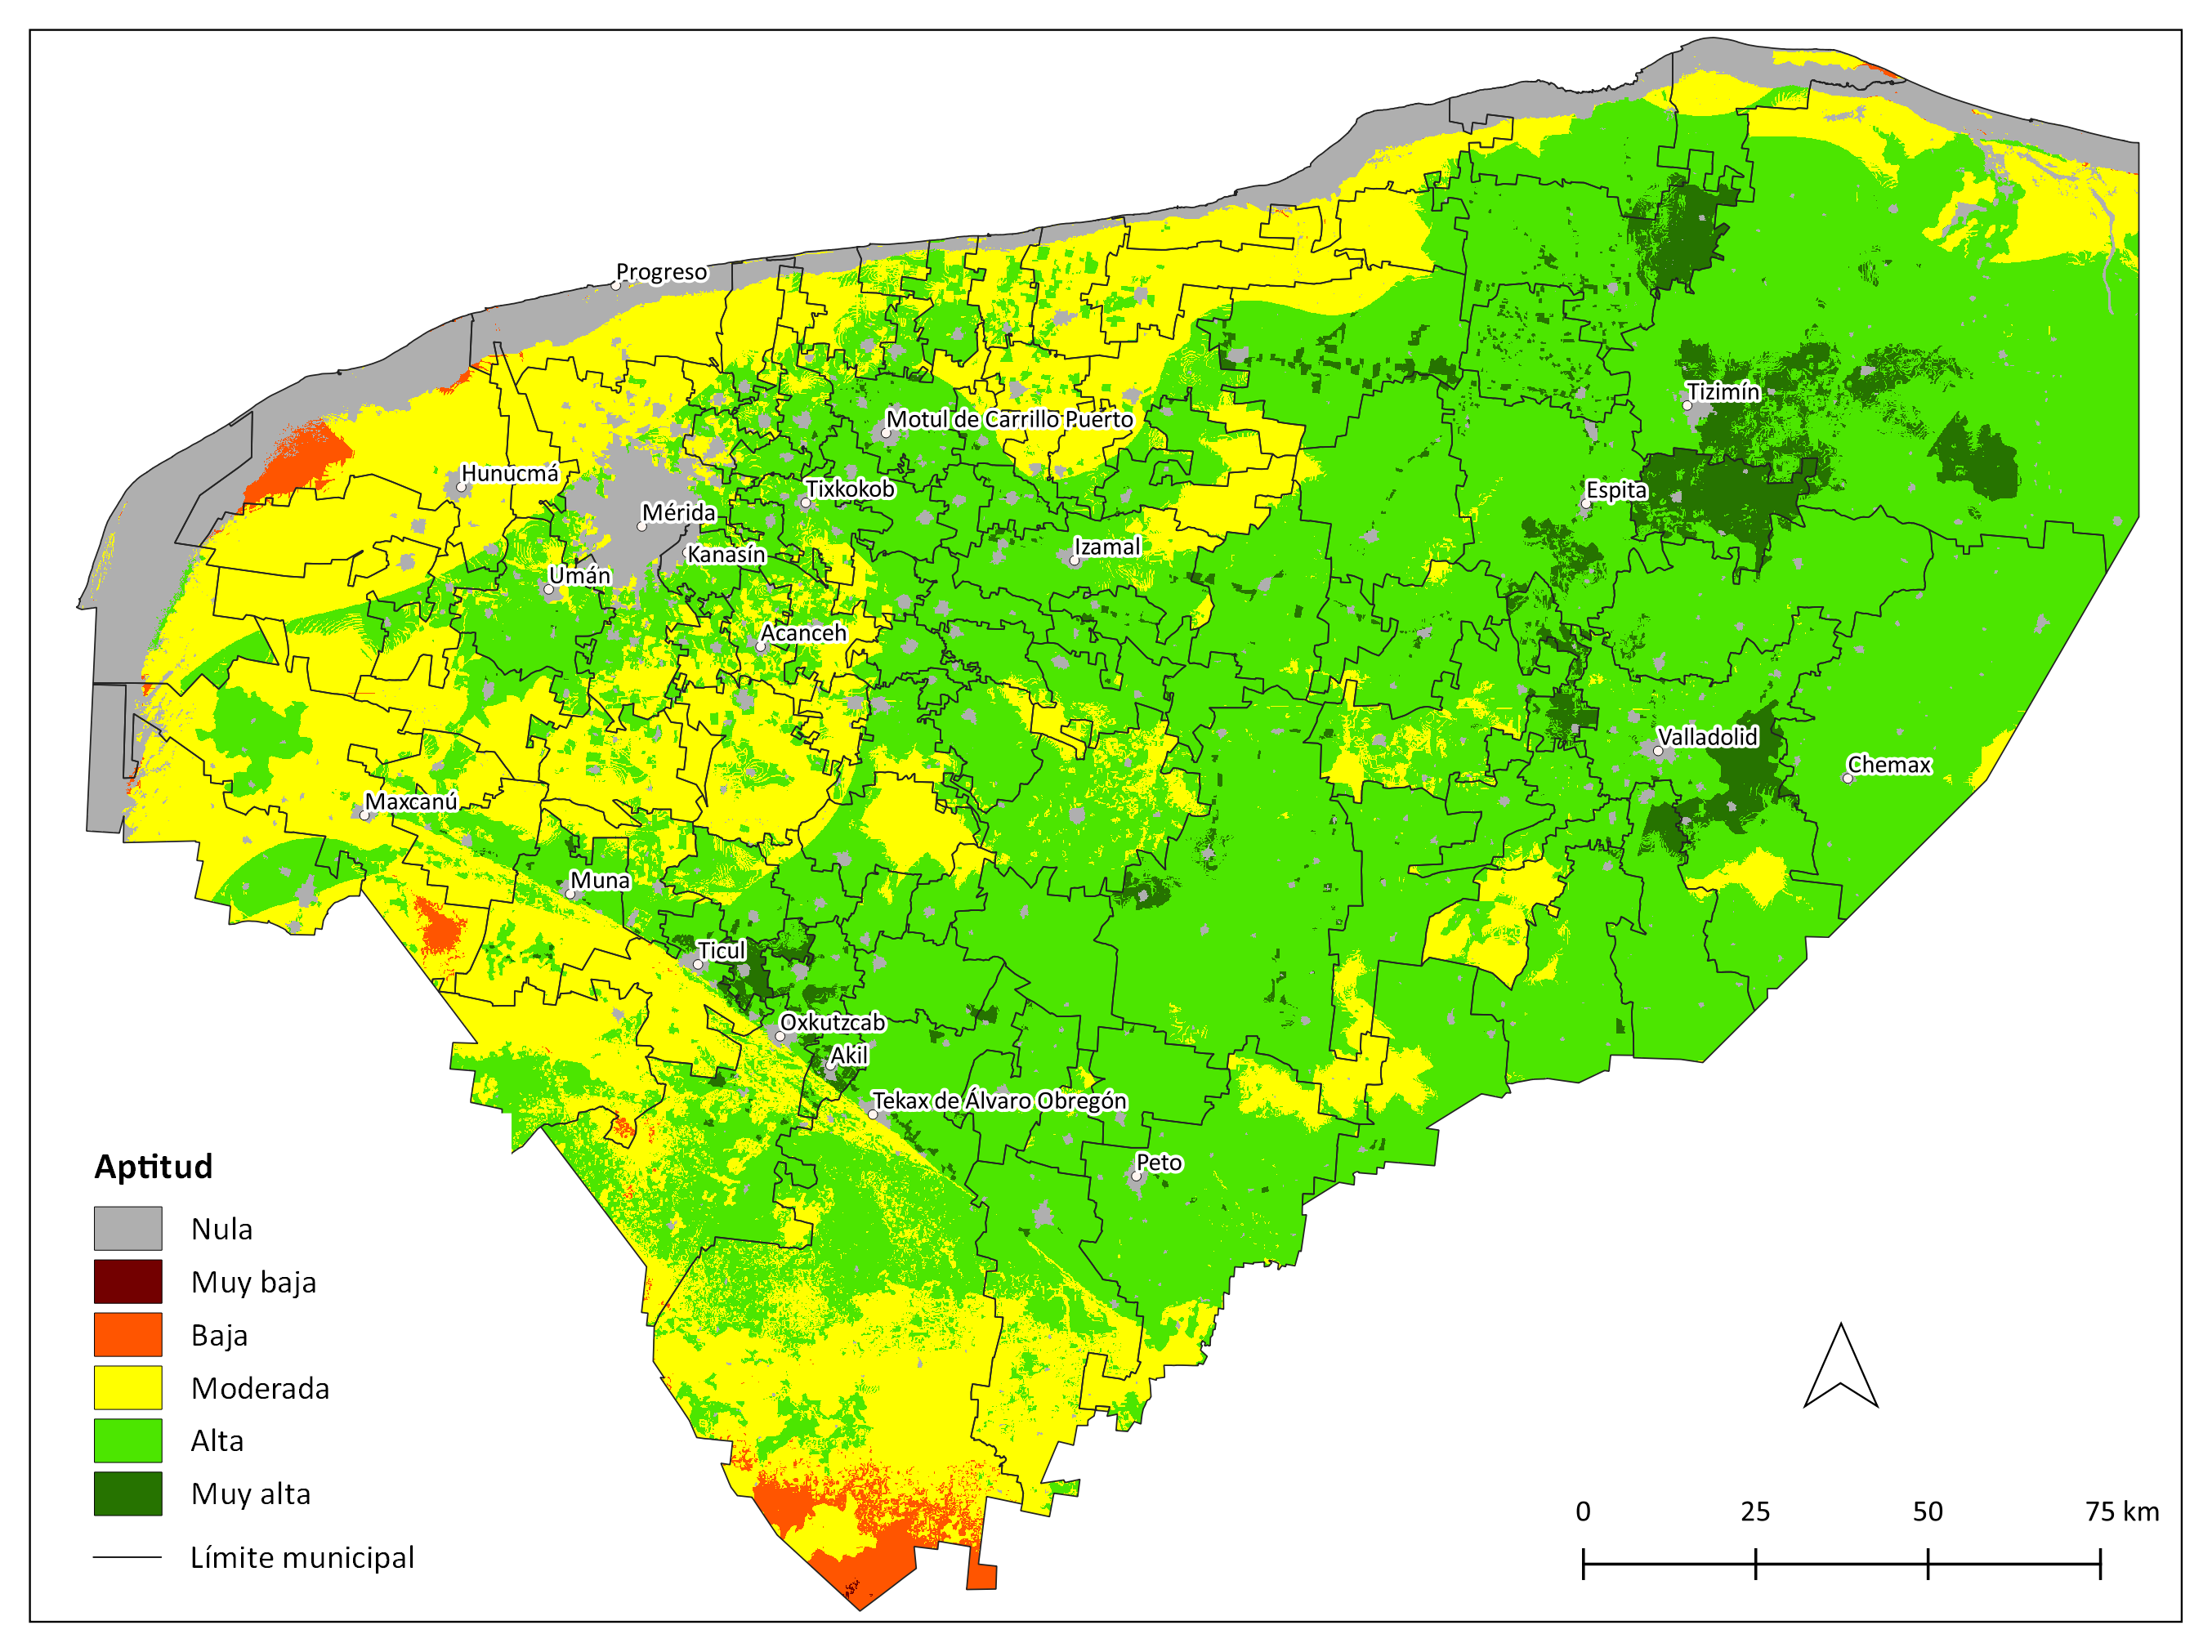 _images/mapa_agricultura_aptitud.png